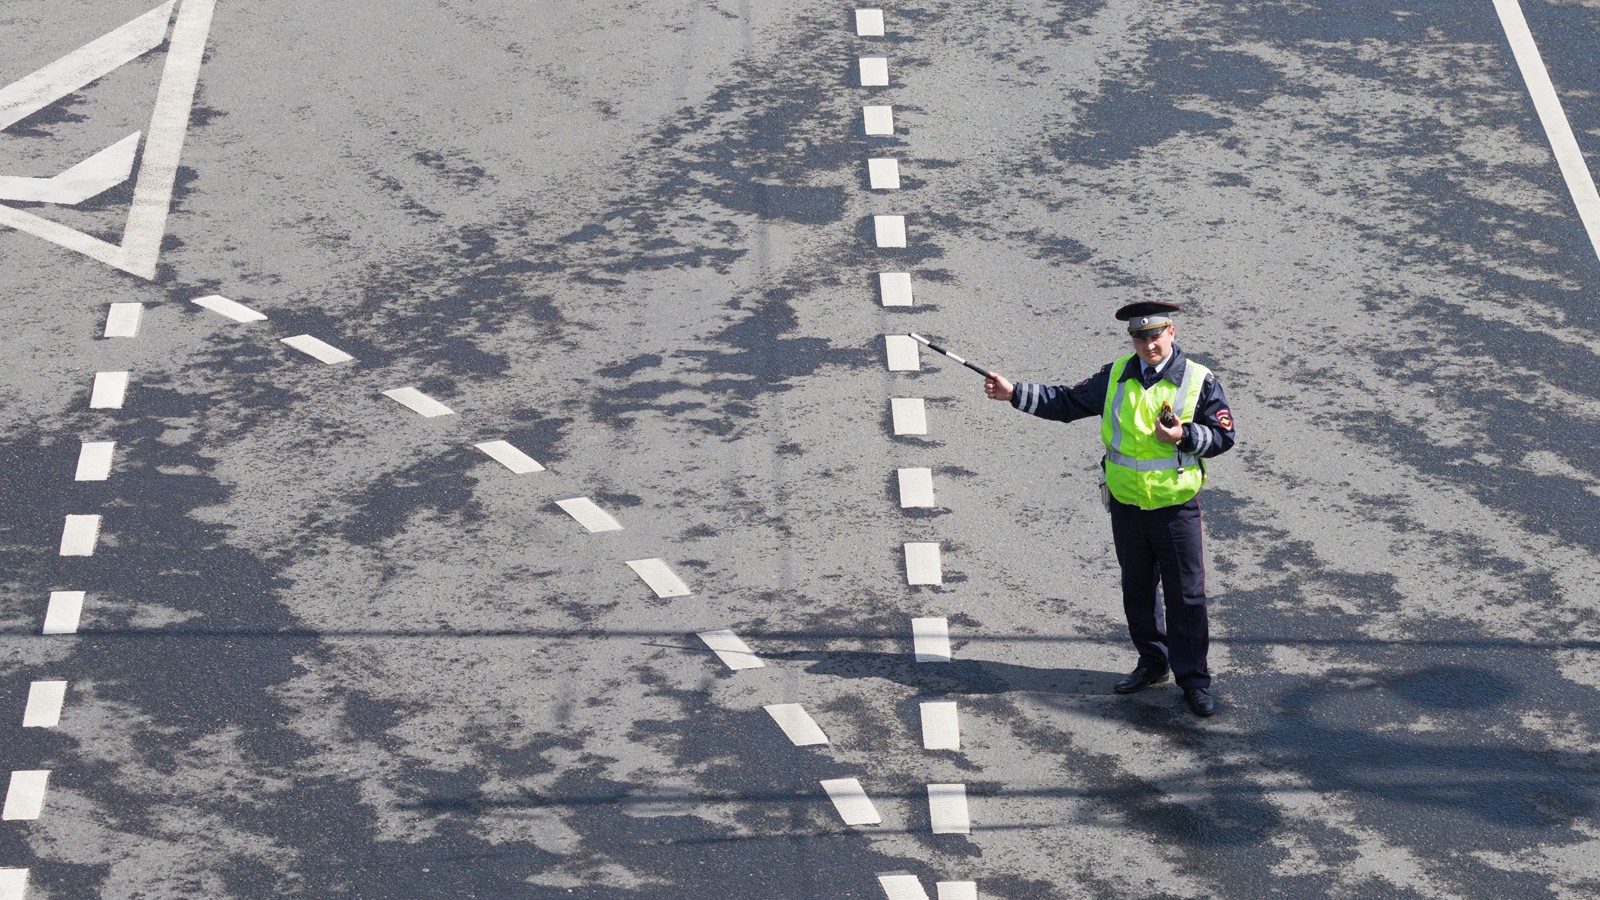 Police officer regulating traffic, Moscow